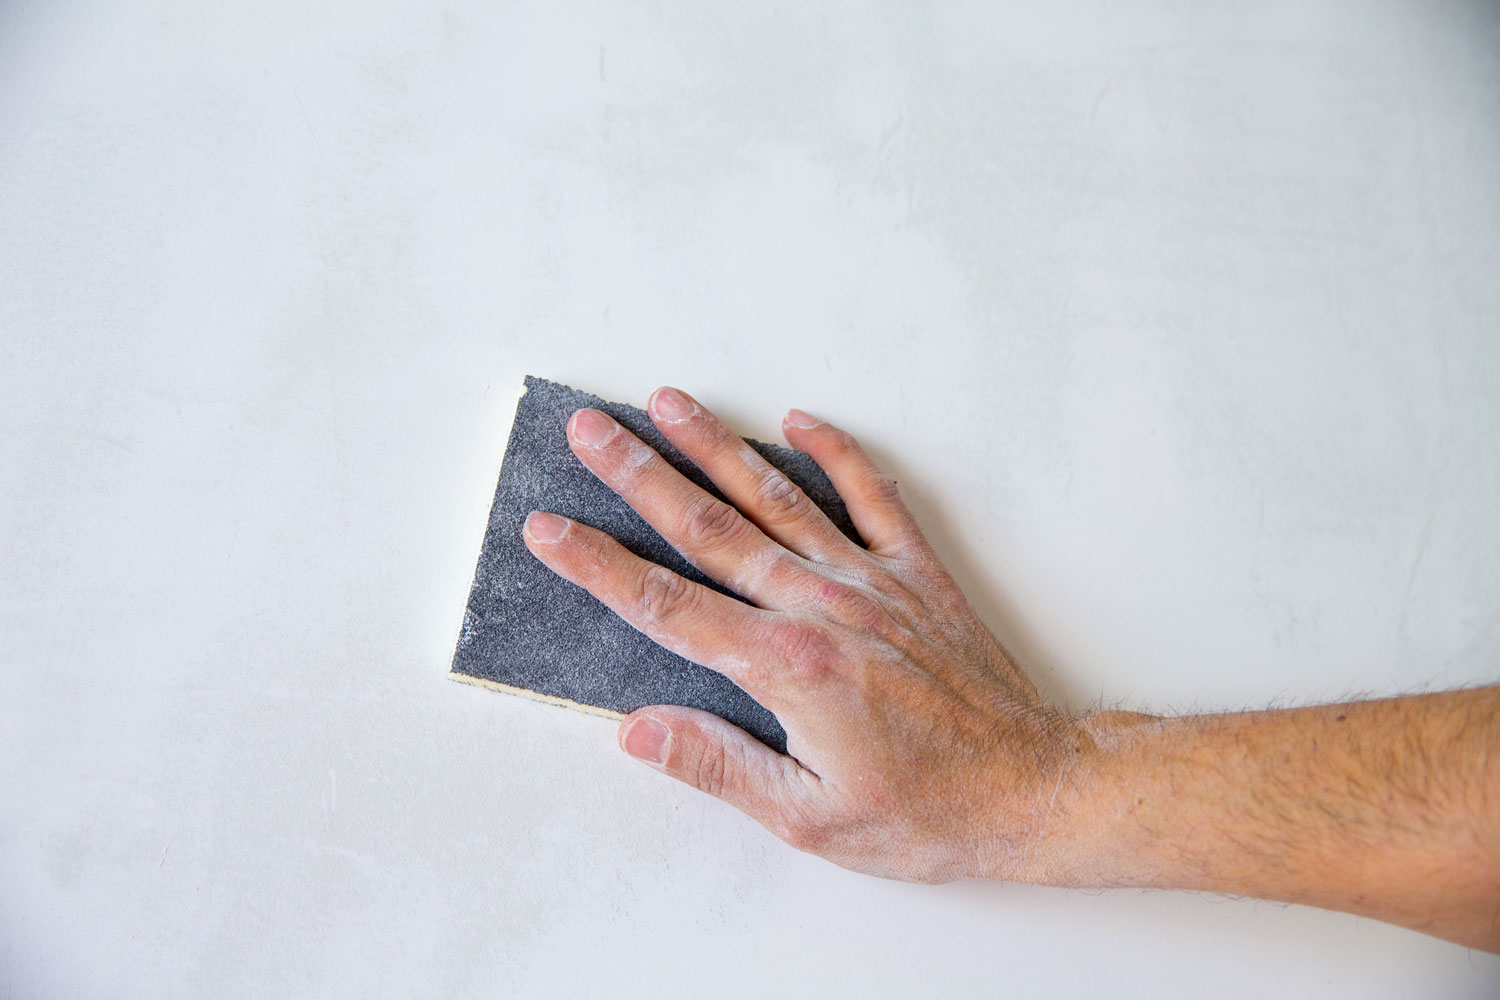 Worker sanding the concrete wall with a sanding paper